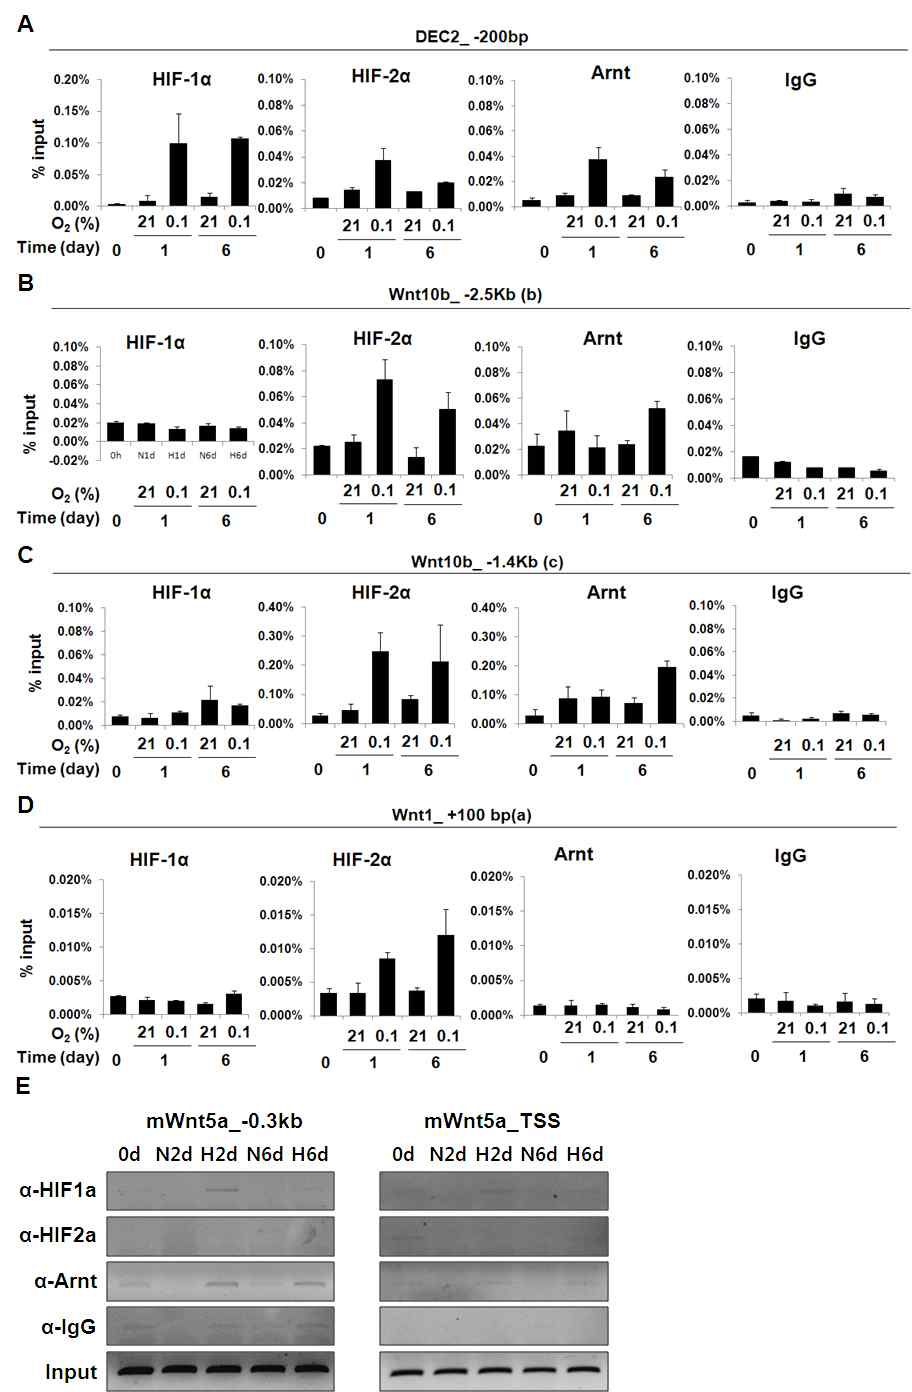 Effect of HIF on the Wnt10b-Wnt1 locus and Wnt5a promoter in hypoxia.